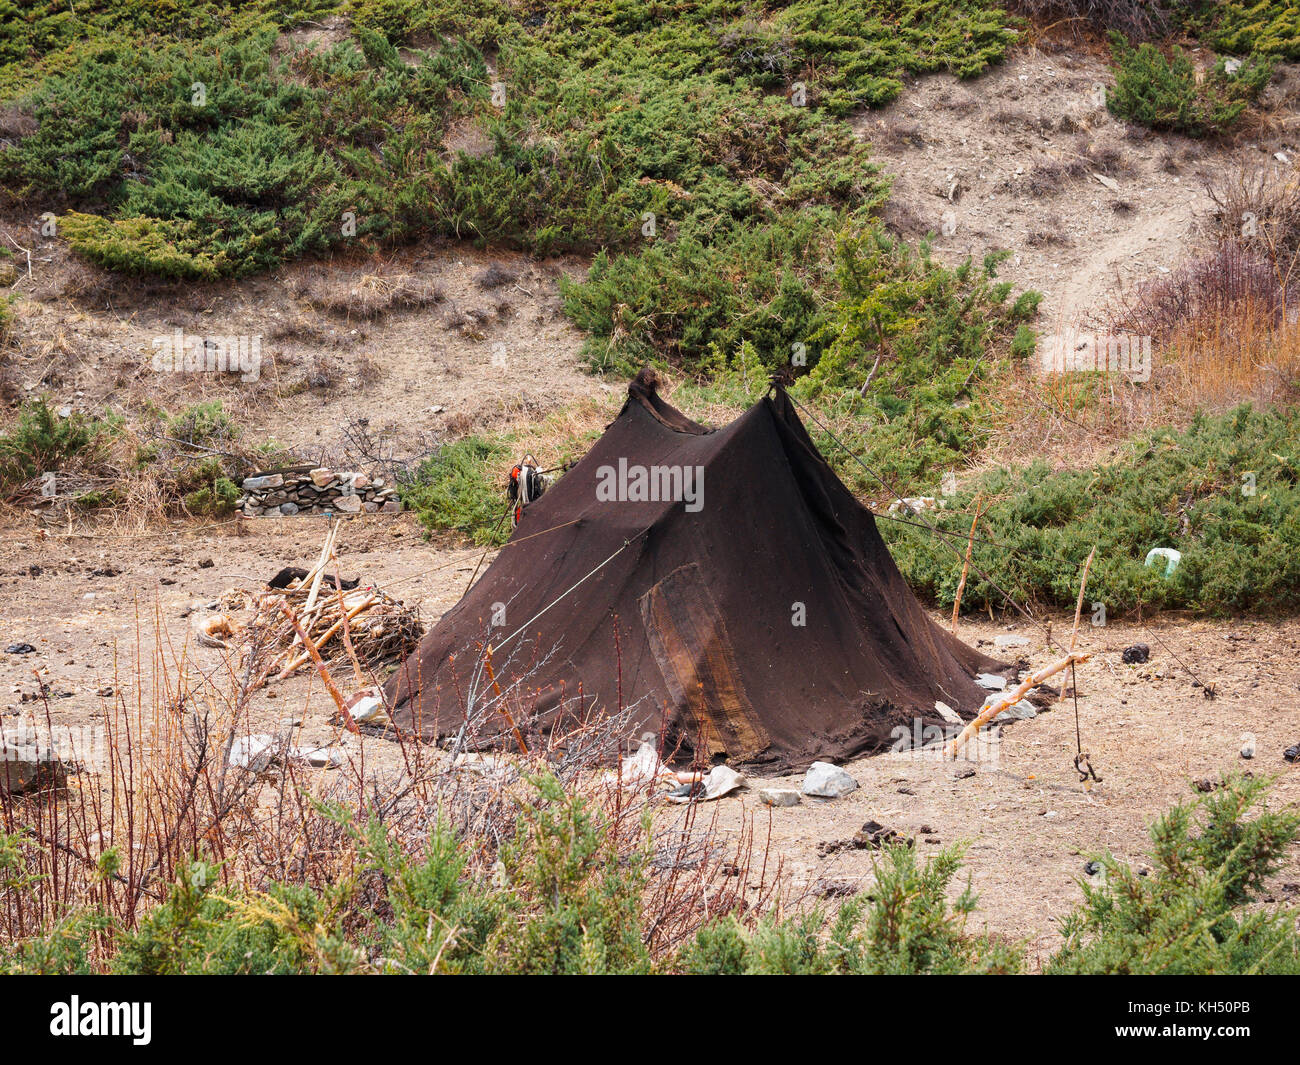 A simple tent made from traditional yak-wool blankets at a high-altitude grazing camp near Ghusang in the Annapurna Himalayas of Nepal Stock Photo